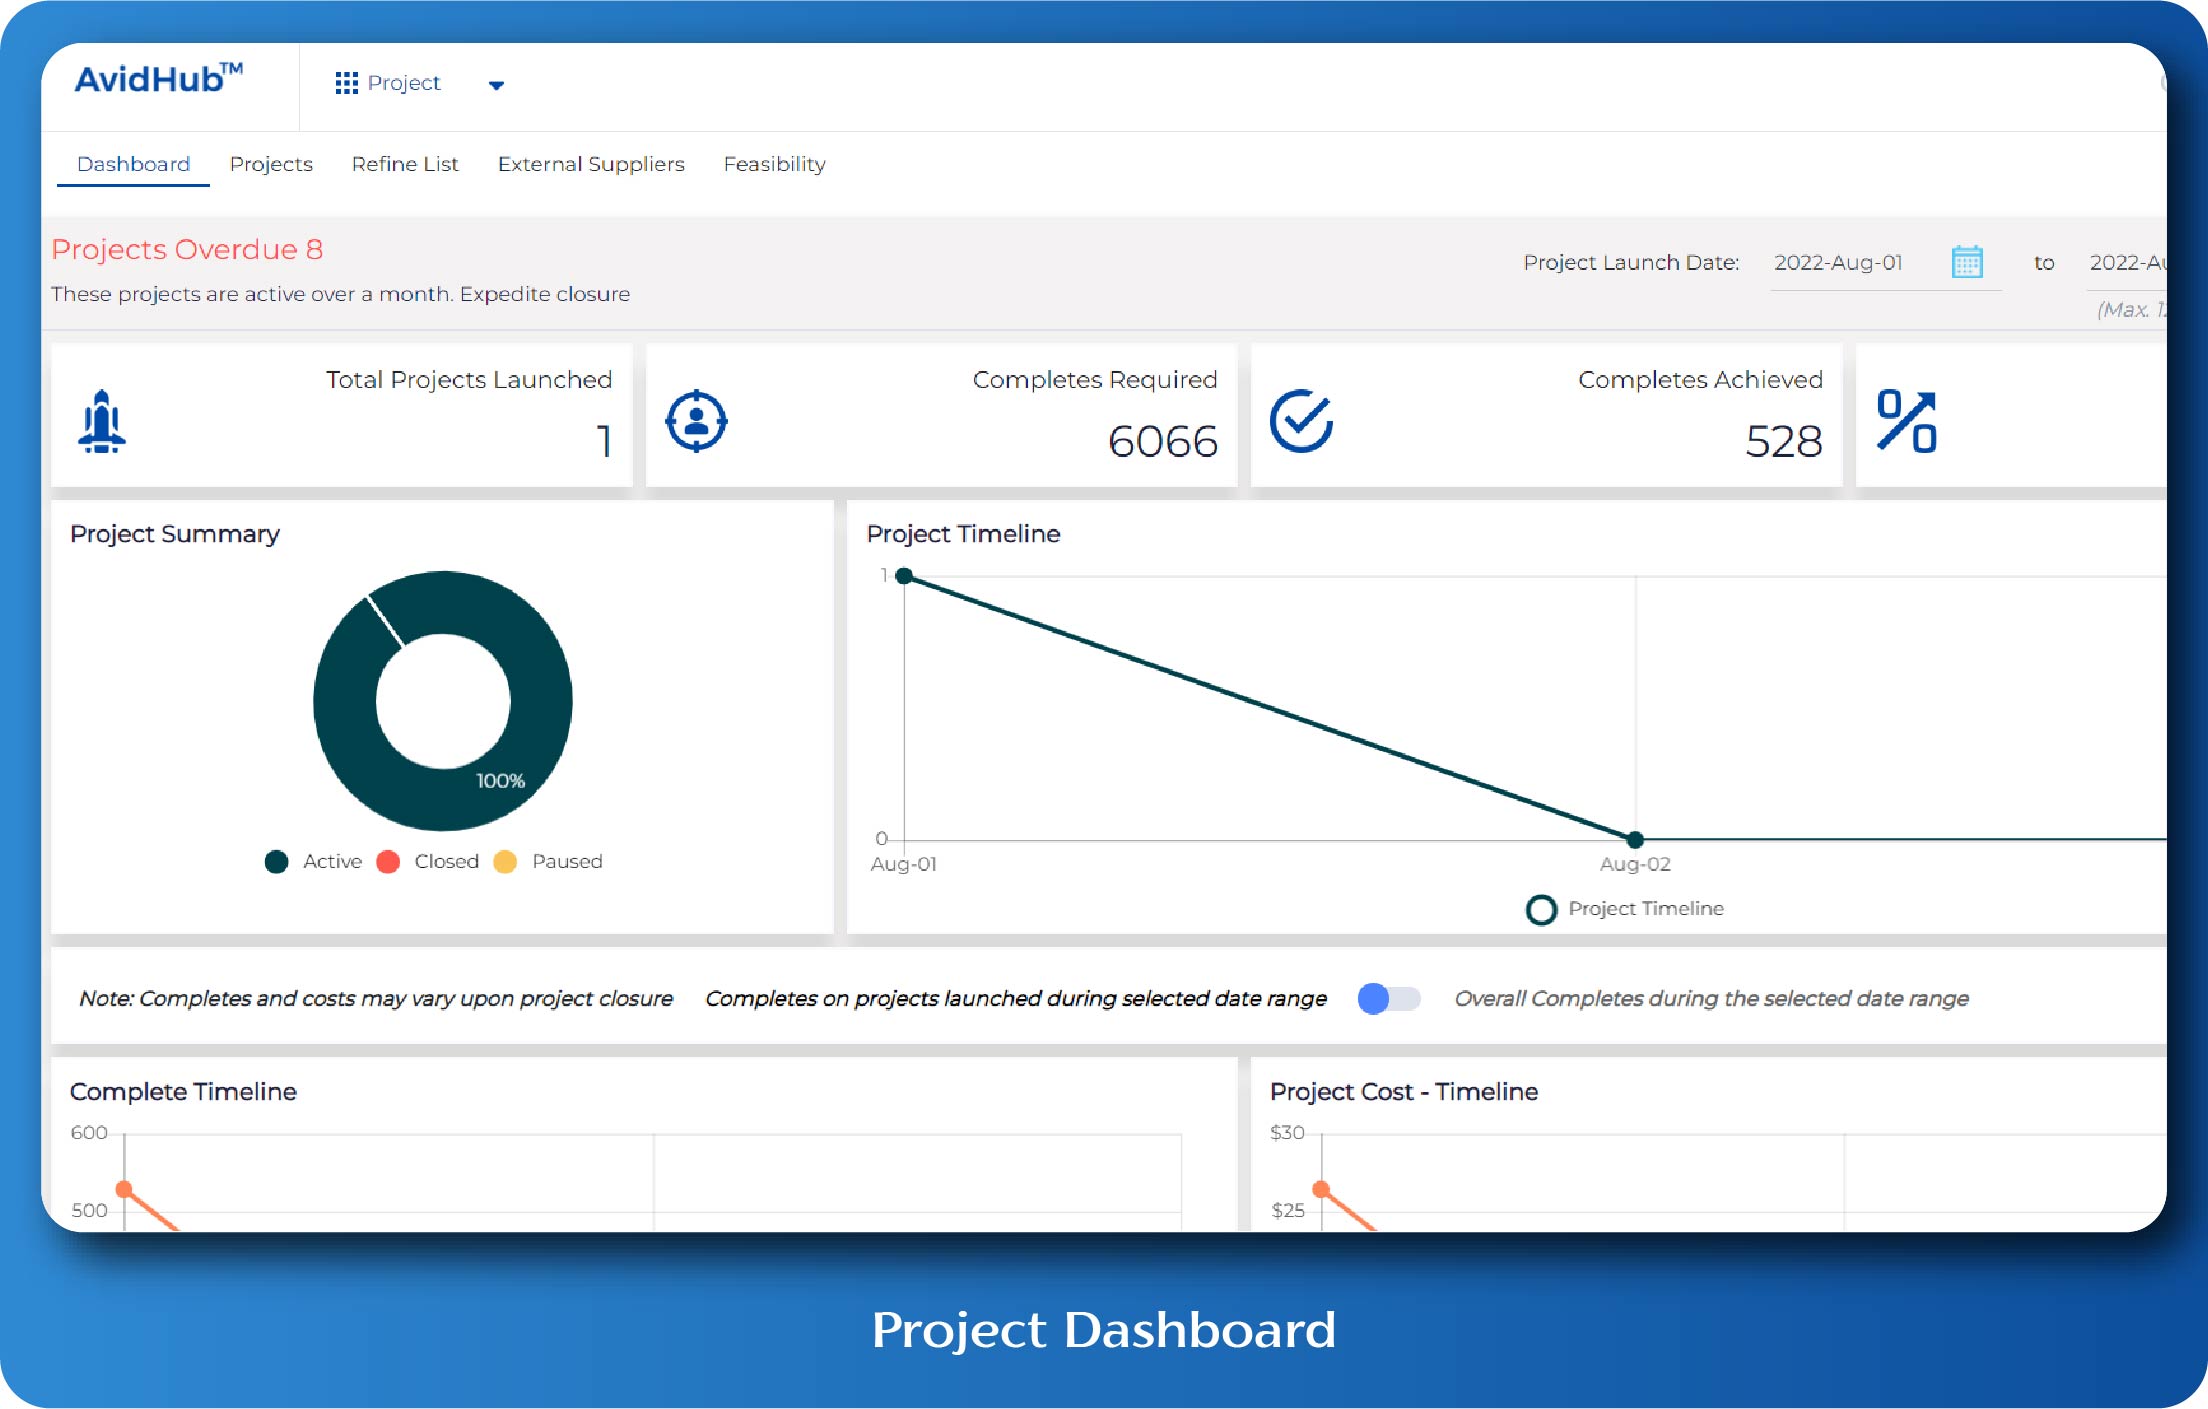 Use Project Dashboard to monitor, analyze and manage your projects